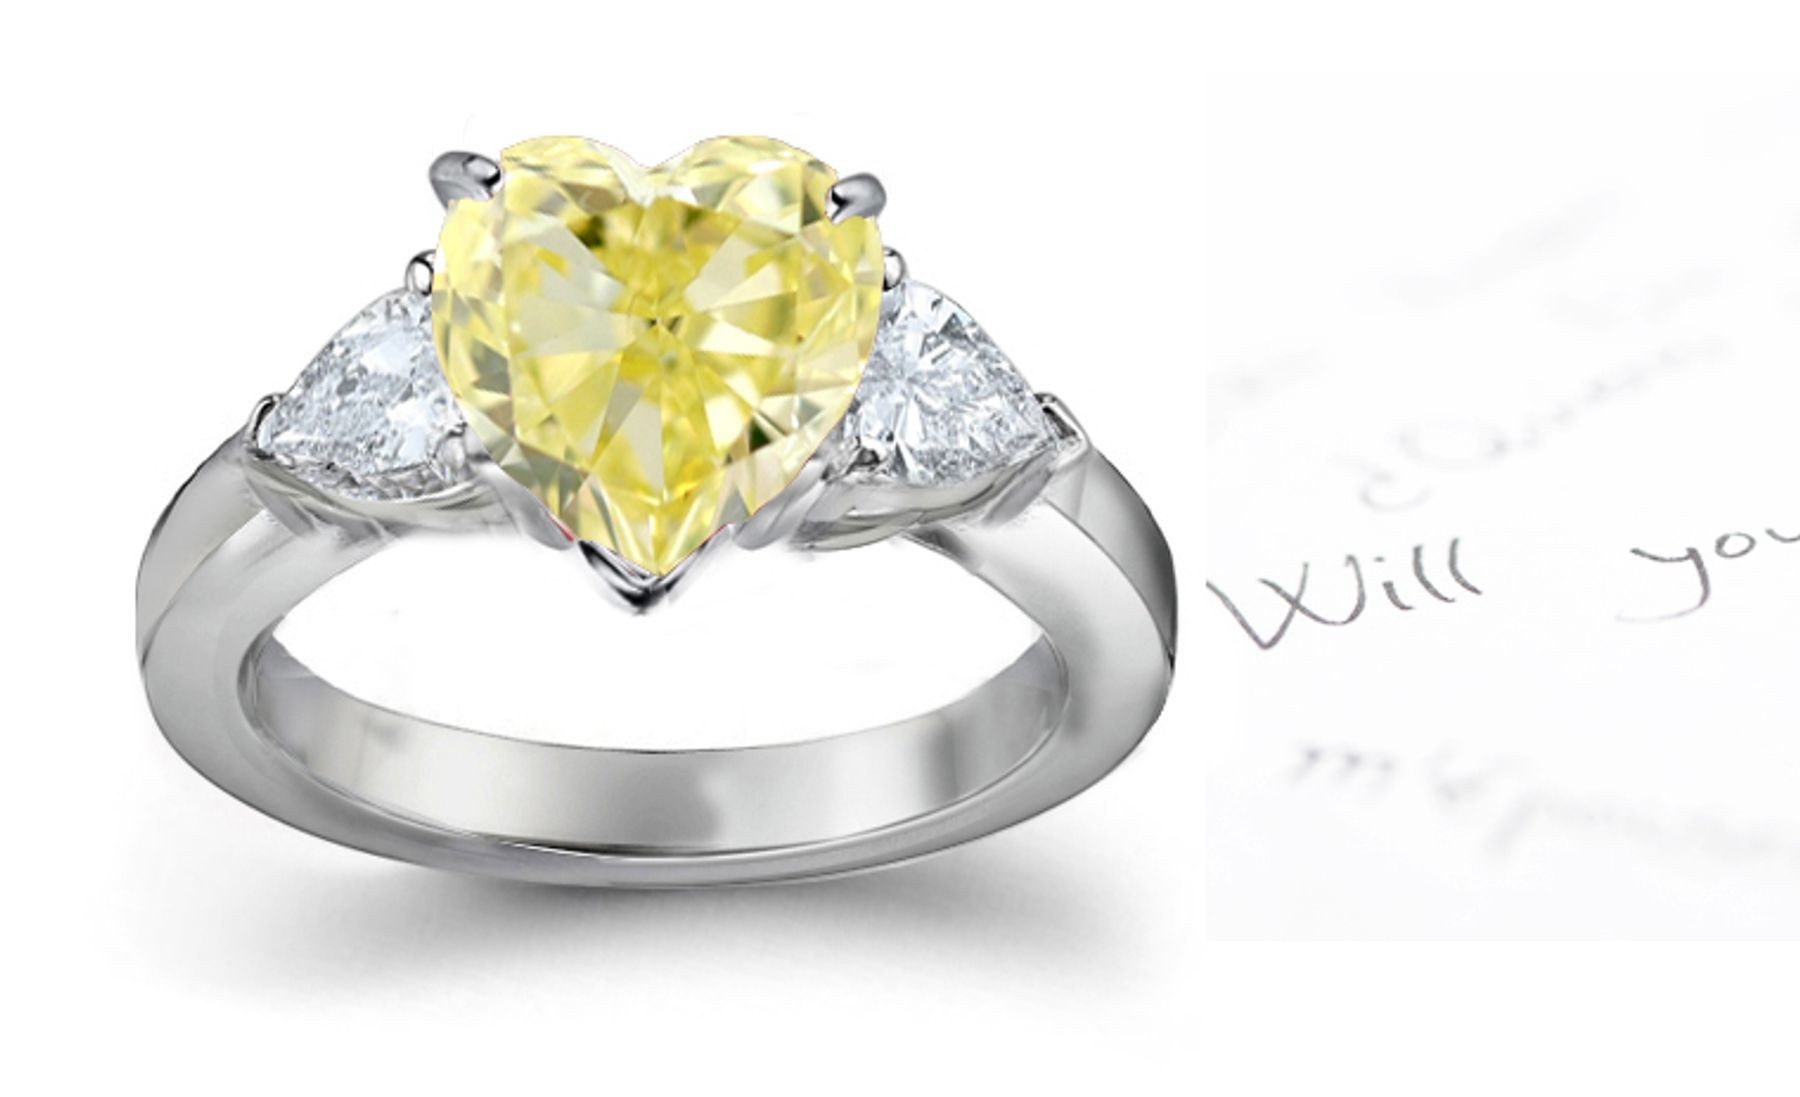 Twin-Tone Sparkling Center Heart Yellow Diamond & Pear Shaped White Diamond Accents Engagement Ring